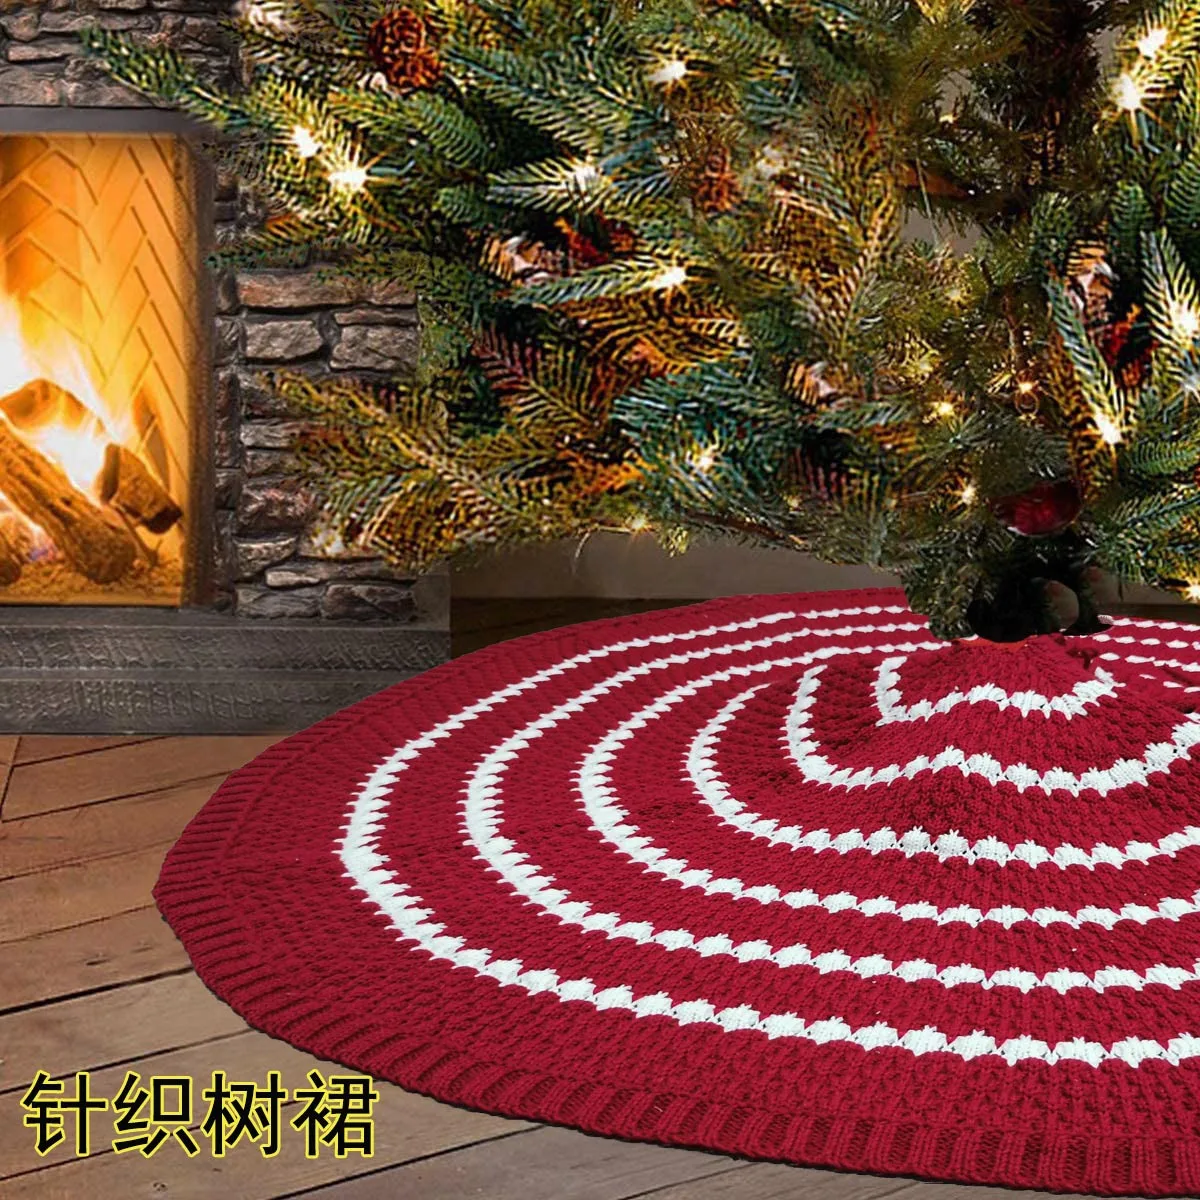 Christmas Tree Skirts 48 Inch Rustic Large Striped Knit Xmas Mats for Party Home Decoration XMAS Gift |